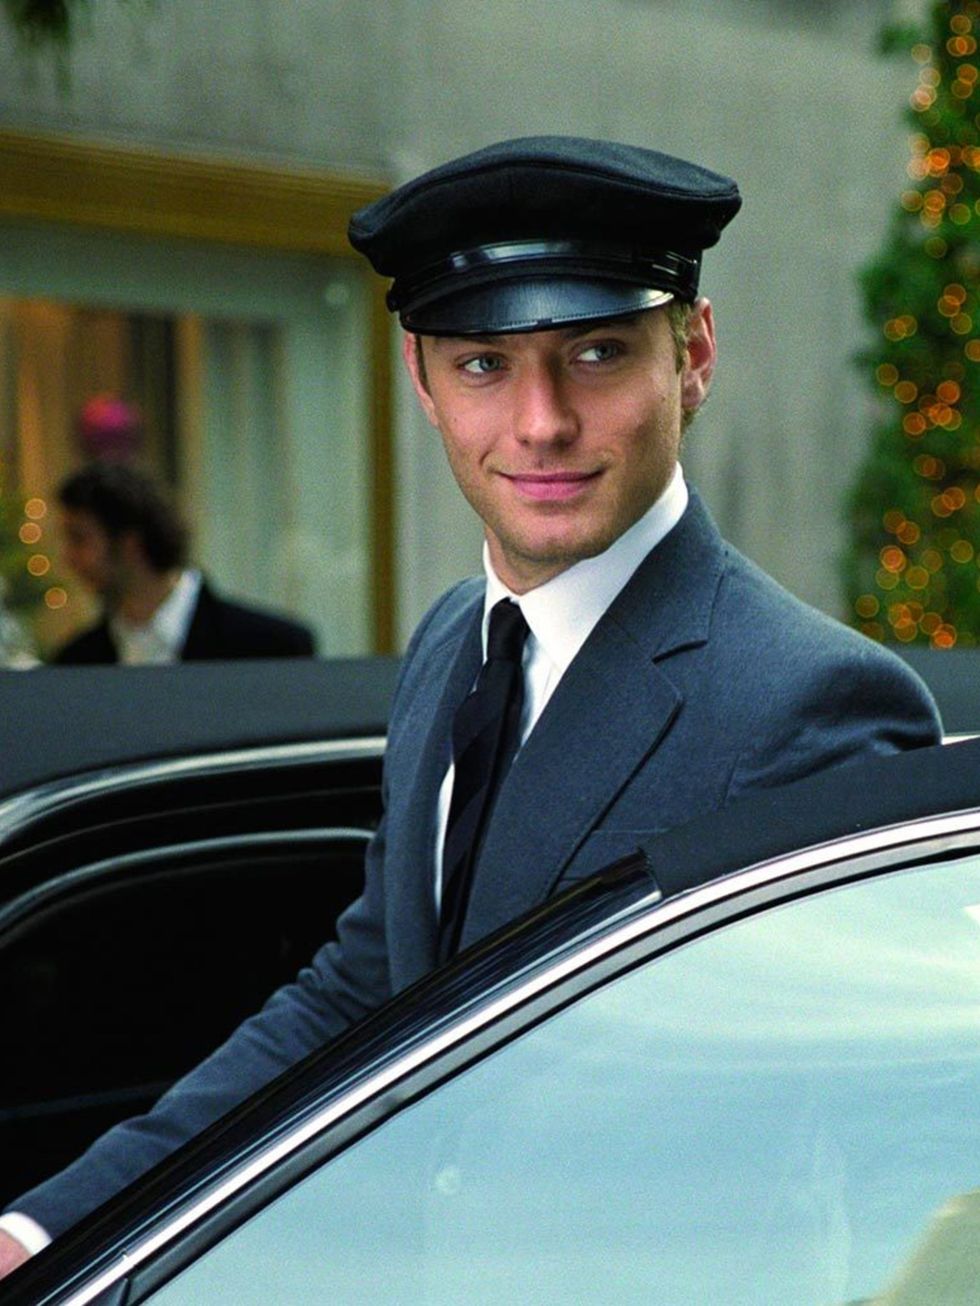 <p>[Sigh] If only we had a chauffeur that looked like that.</p>